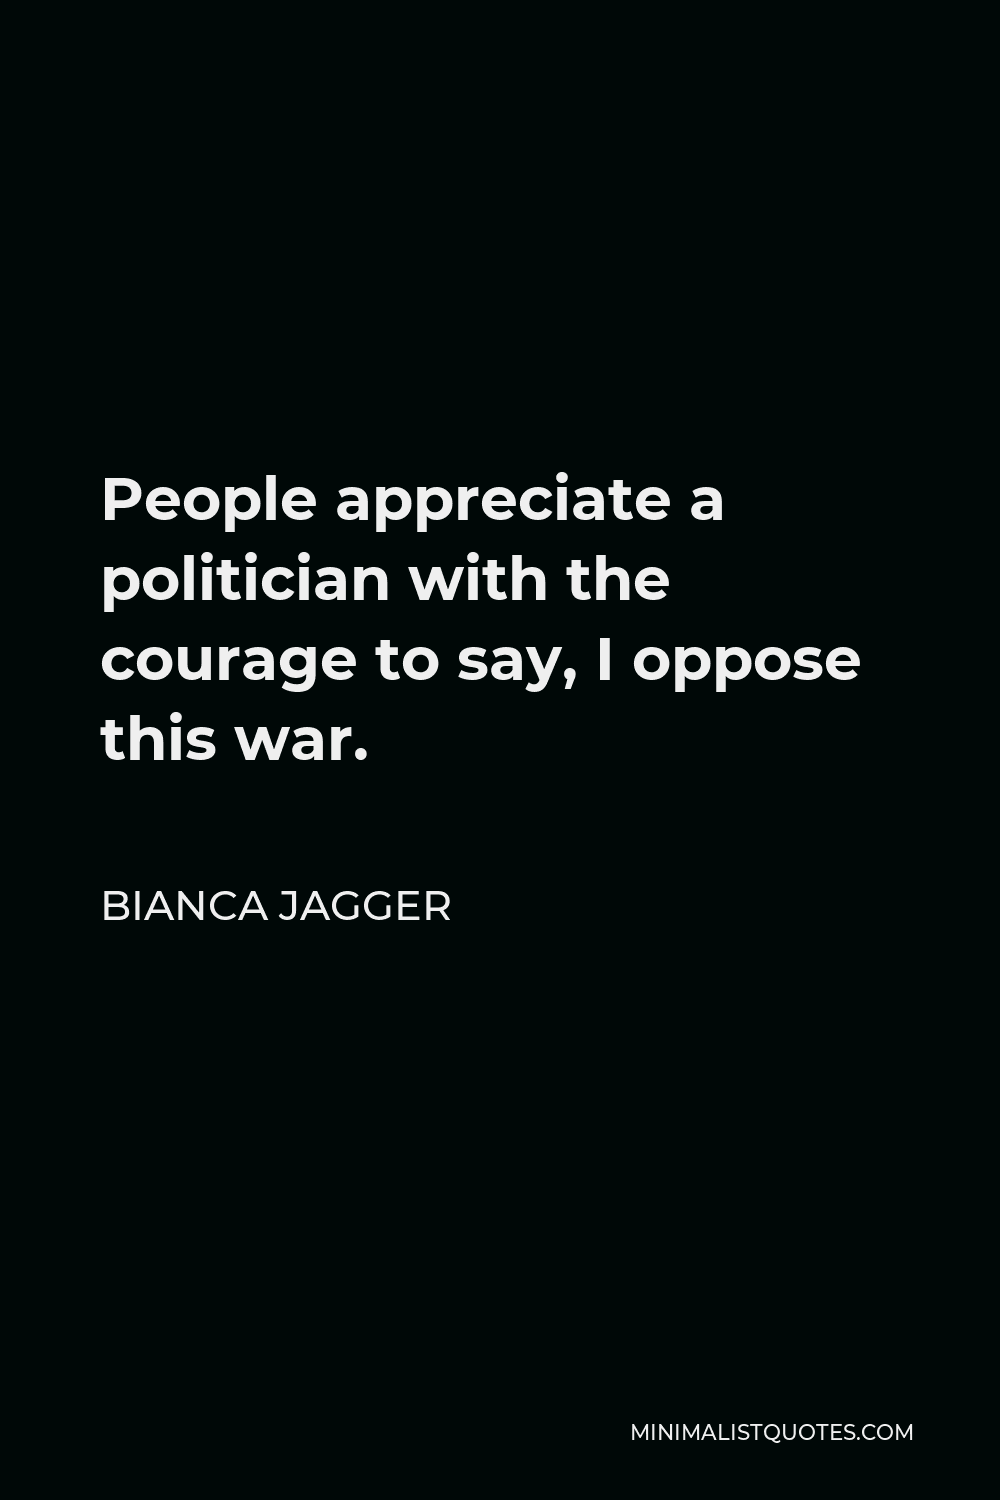 Bianca Jagger Quote - People appreciate a politician with the courage to say, I oppose this war.